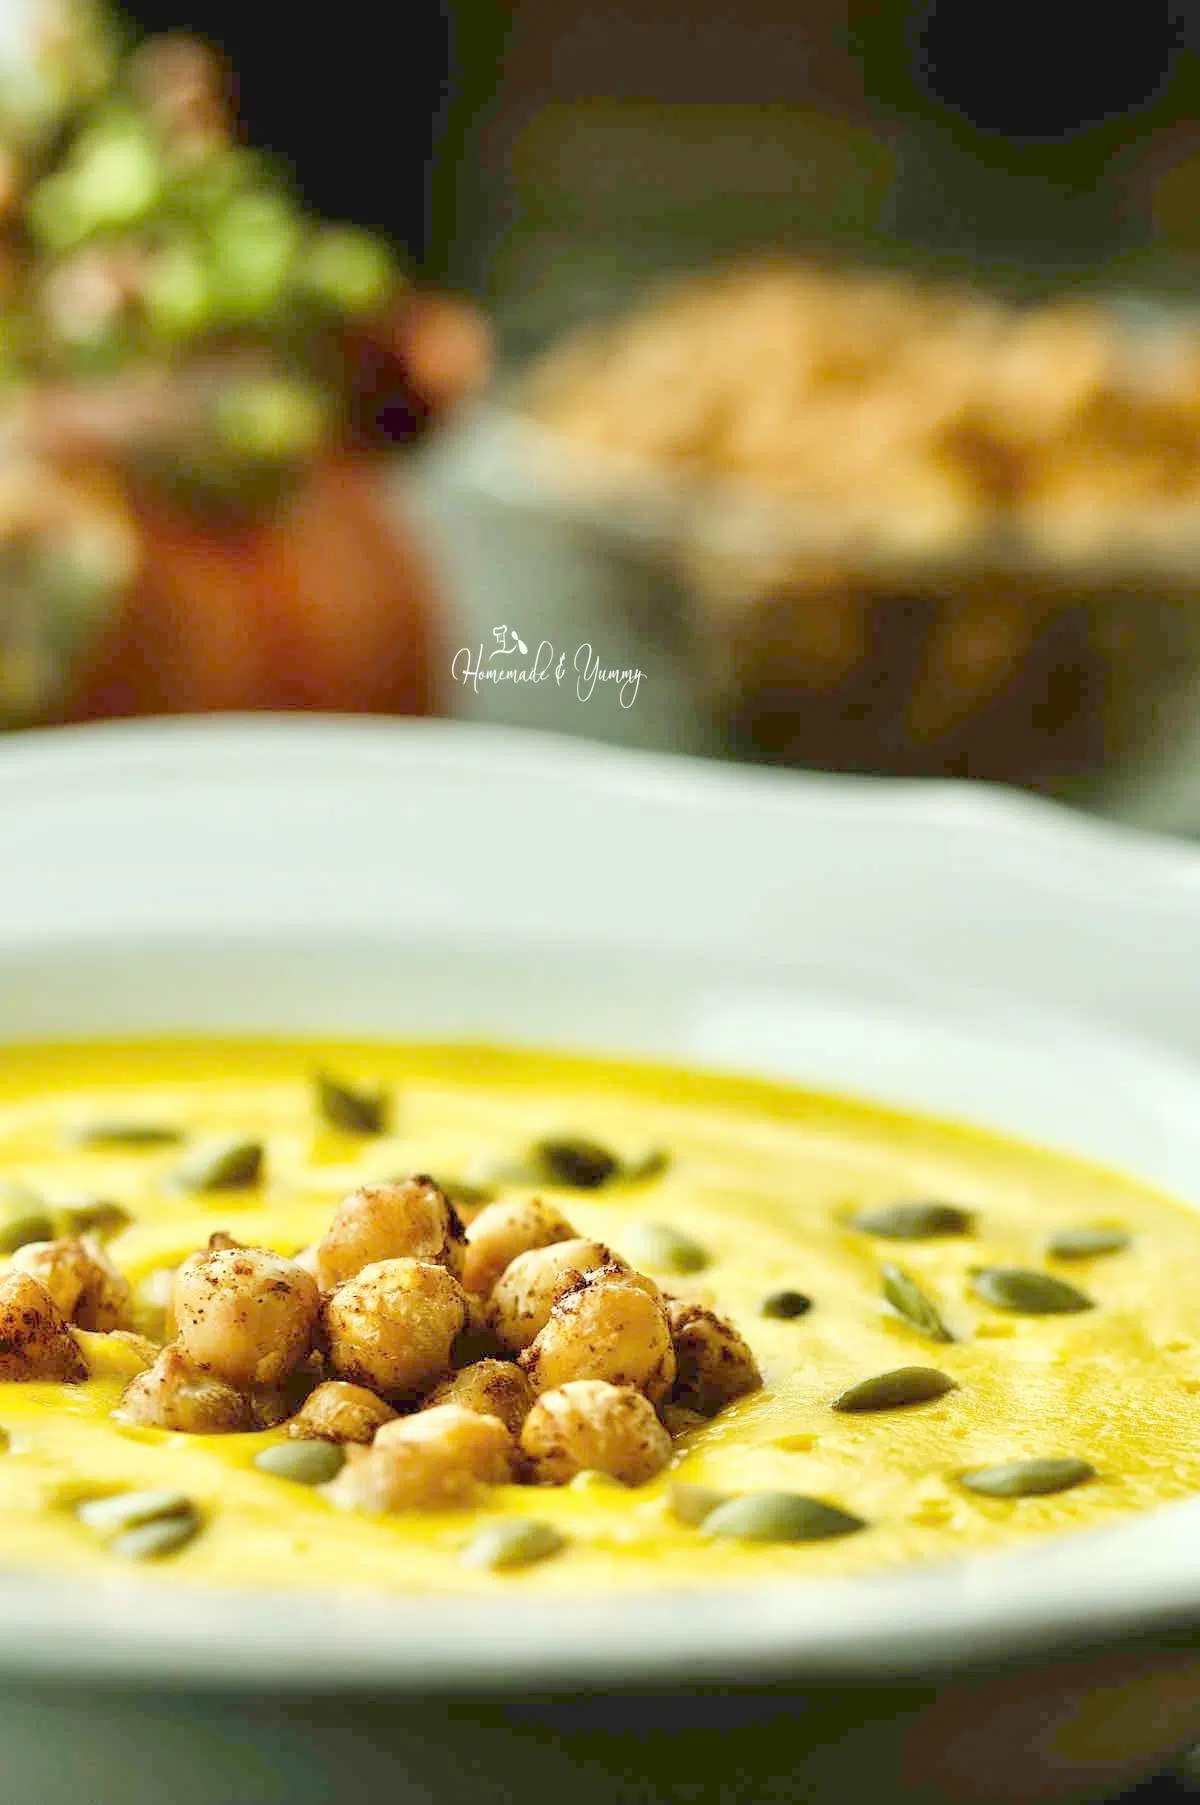 Chickpeas and pumpkin seeds are garnish on the soup.